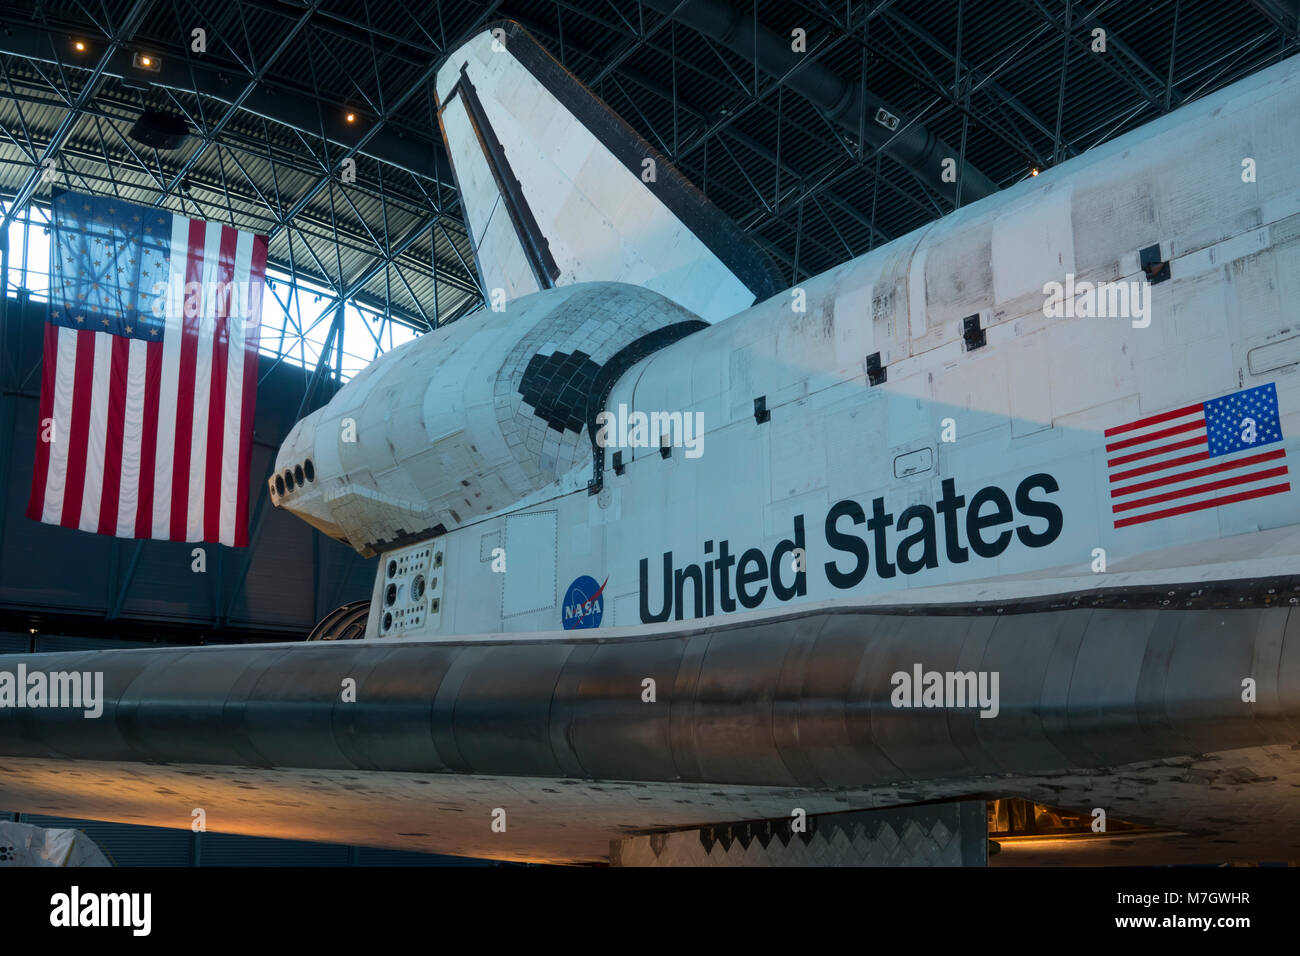 Steven F. Udvar-Hazy Center Smithsonian National Air and Space Museum Chantilly Virginia VA Space Shuttle Discovery on display Stock Photo